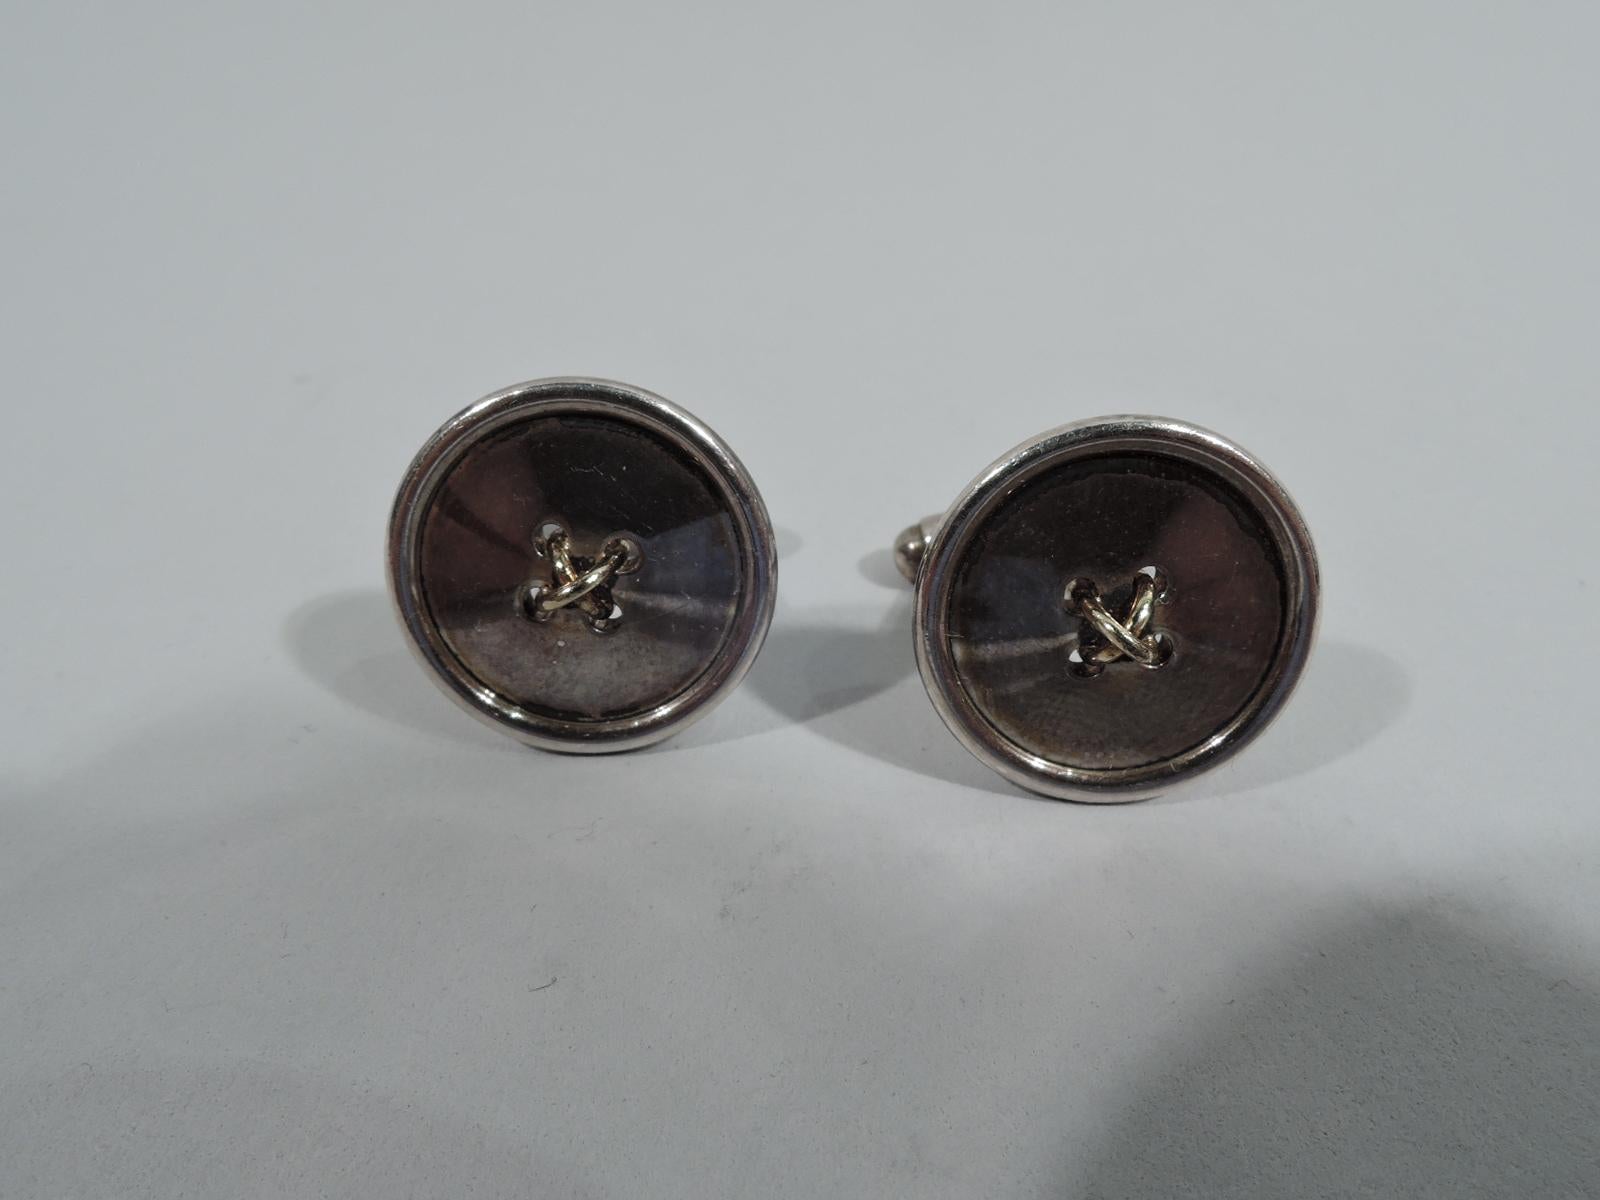 Pair of sterling silver jokey button-form cufflinks. Each: Round with 4 central holes threaded with 18k gold. Marked “Tiffany & Co. 925-750”.